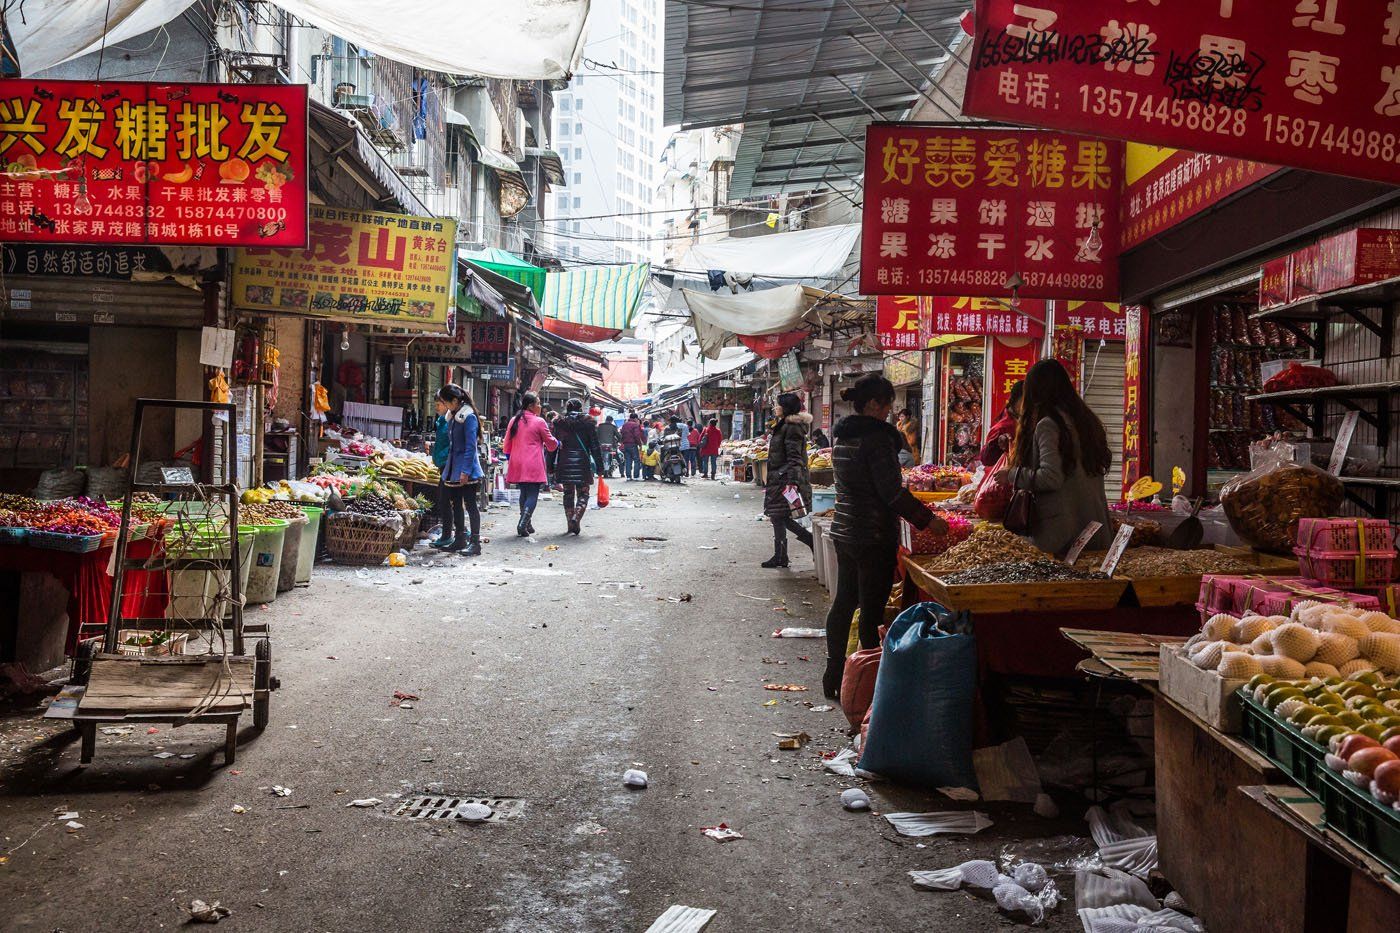 Market in China